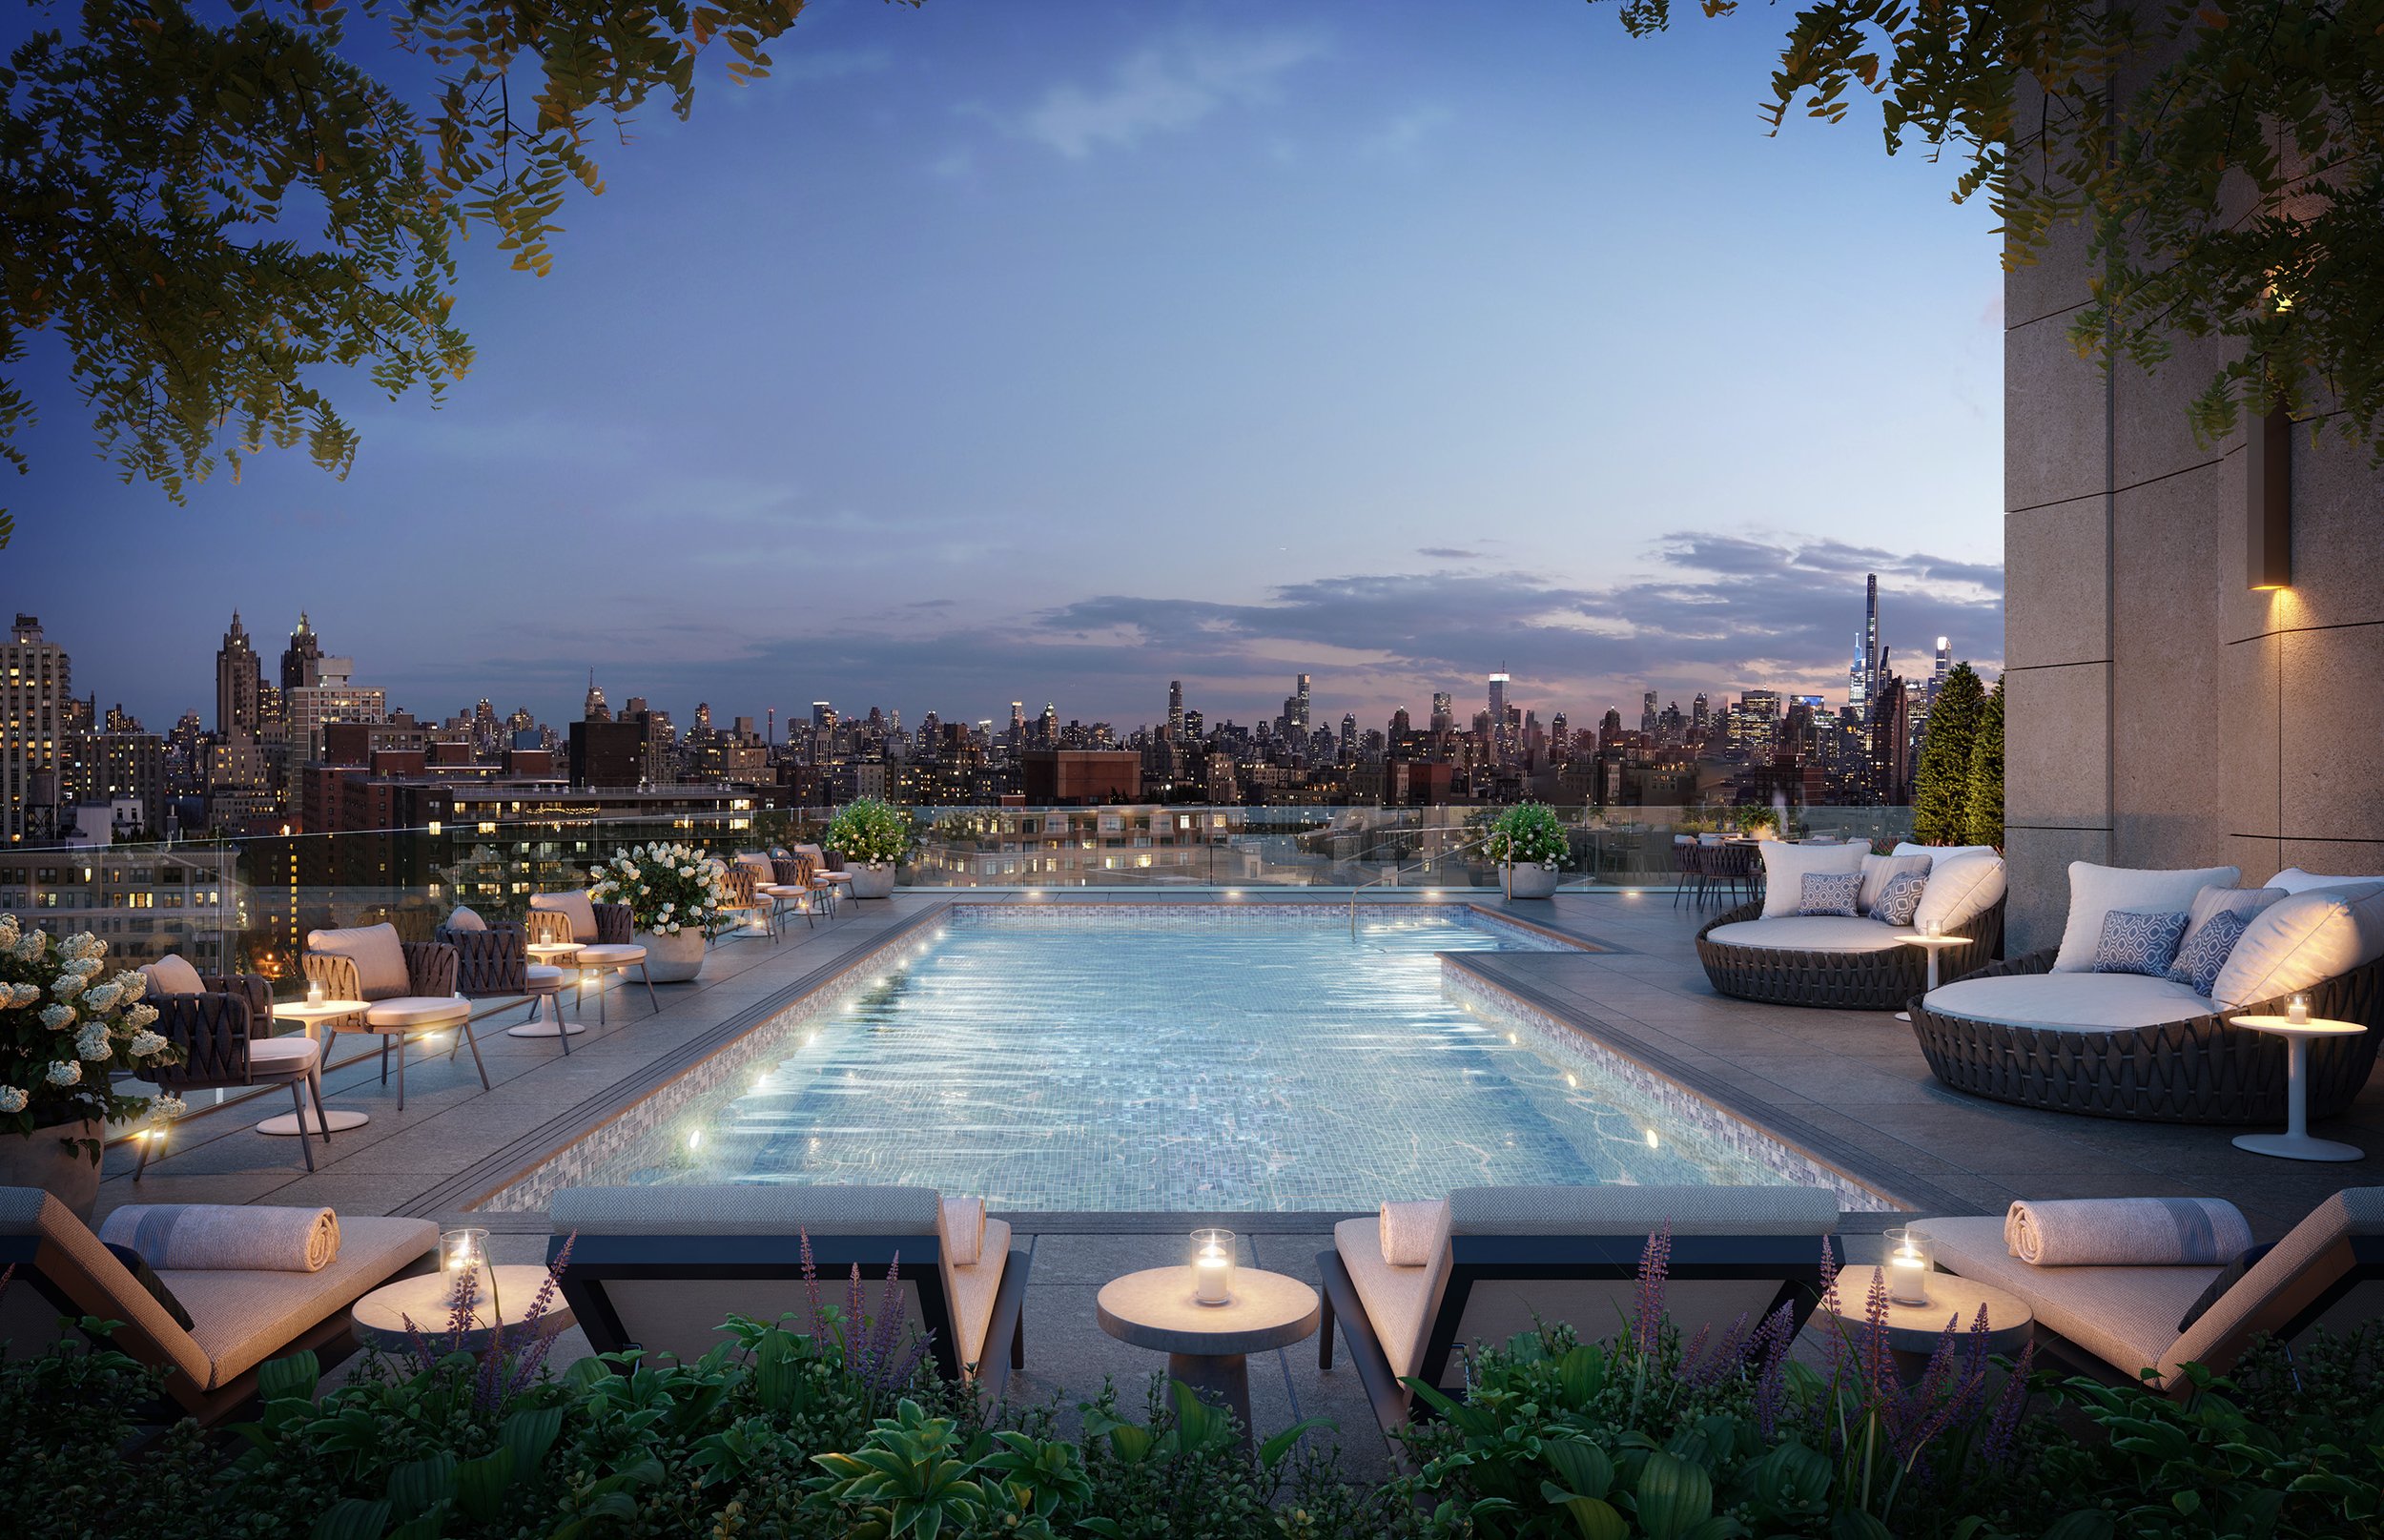  Located in one of Manhattan’s most iconic neighborhoods, The Westly is situated between Central and Riverside Parks. The building is in close proximity to notable private schools including Dwight, Trinity, and Columbia Prep private schools and near 